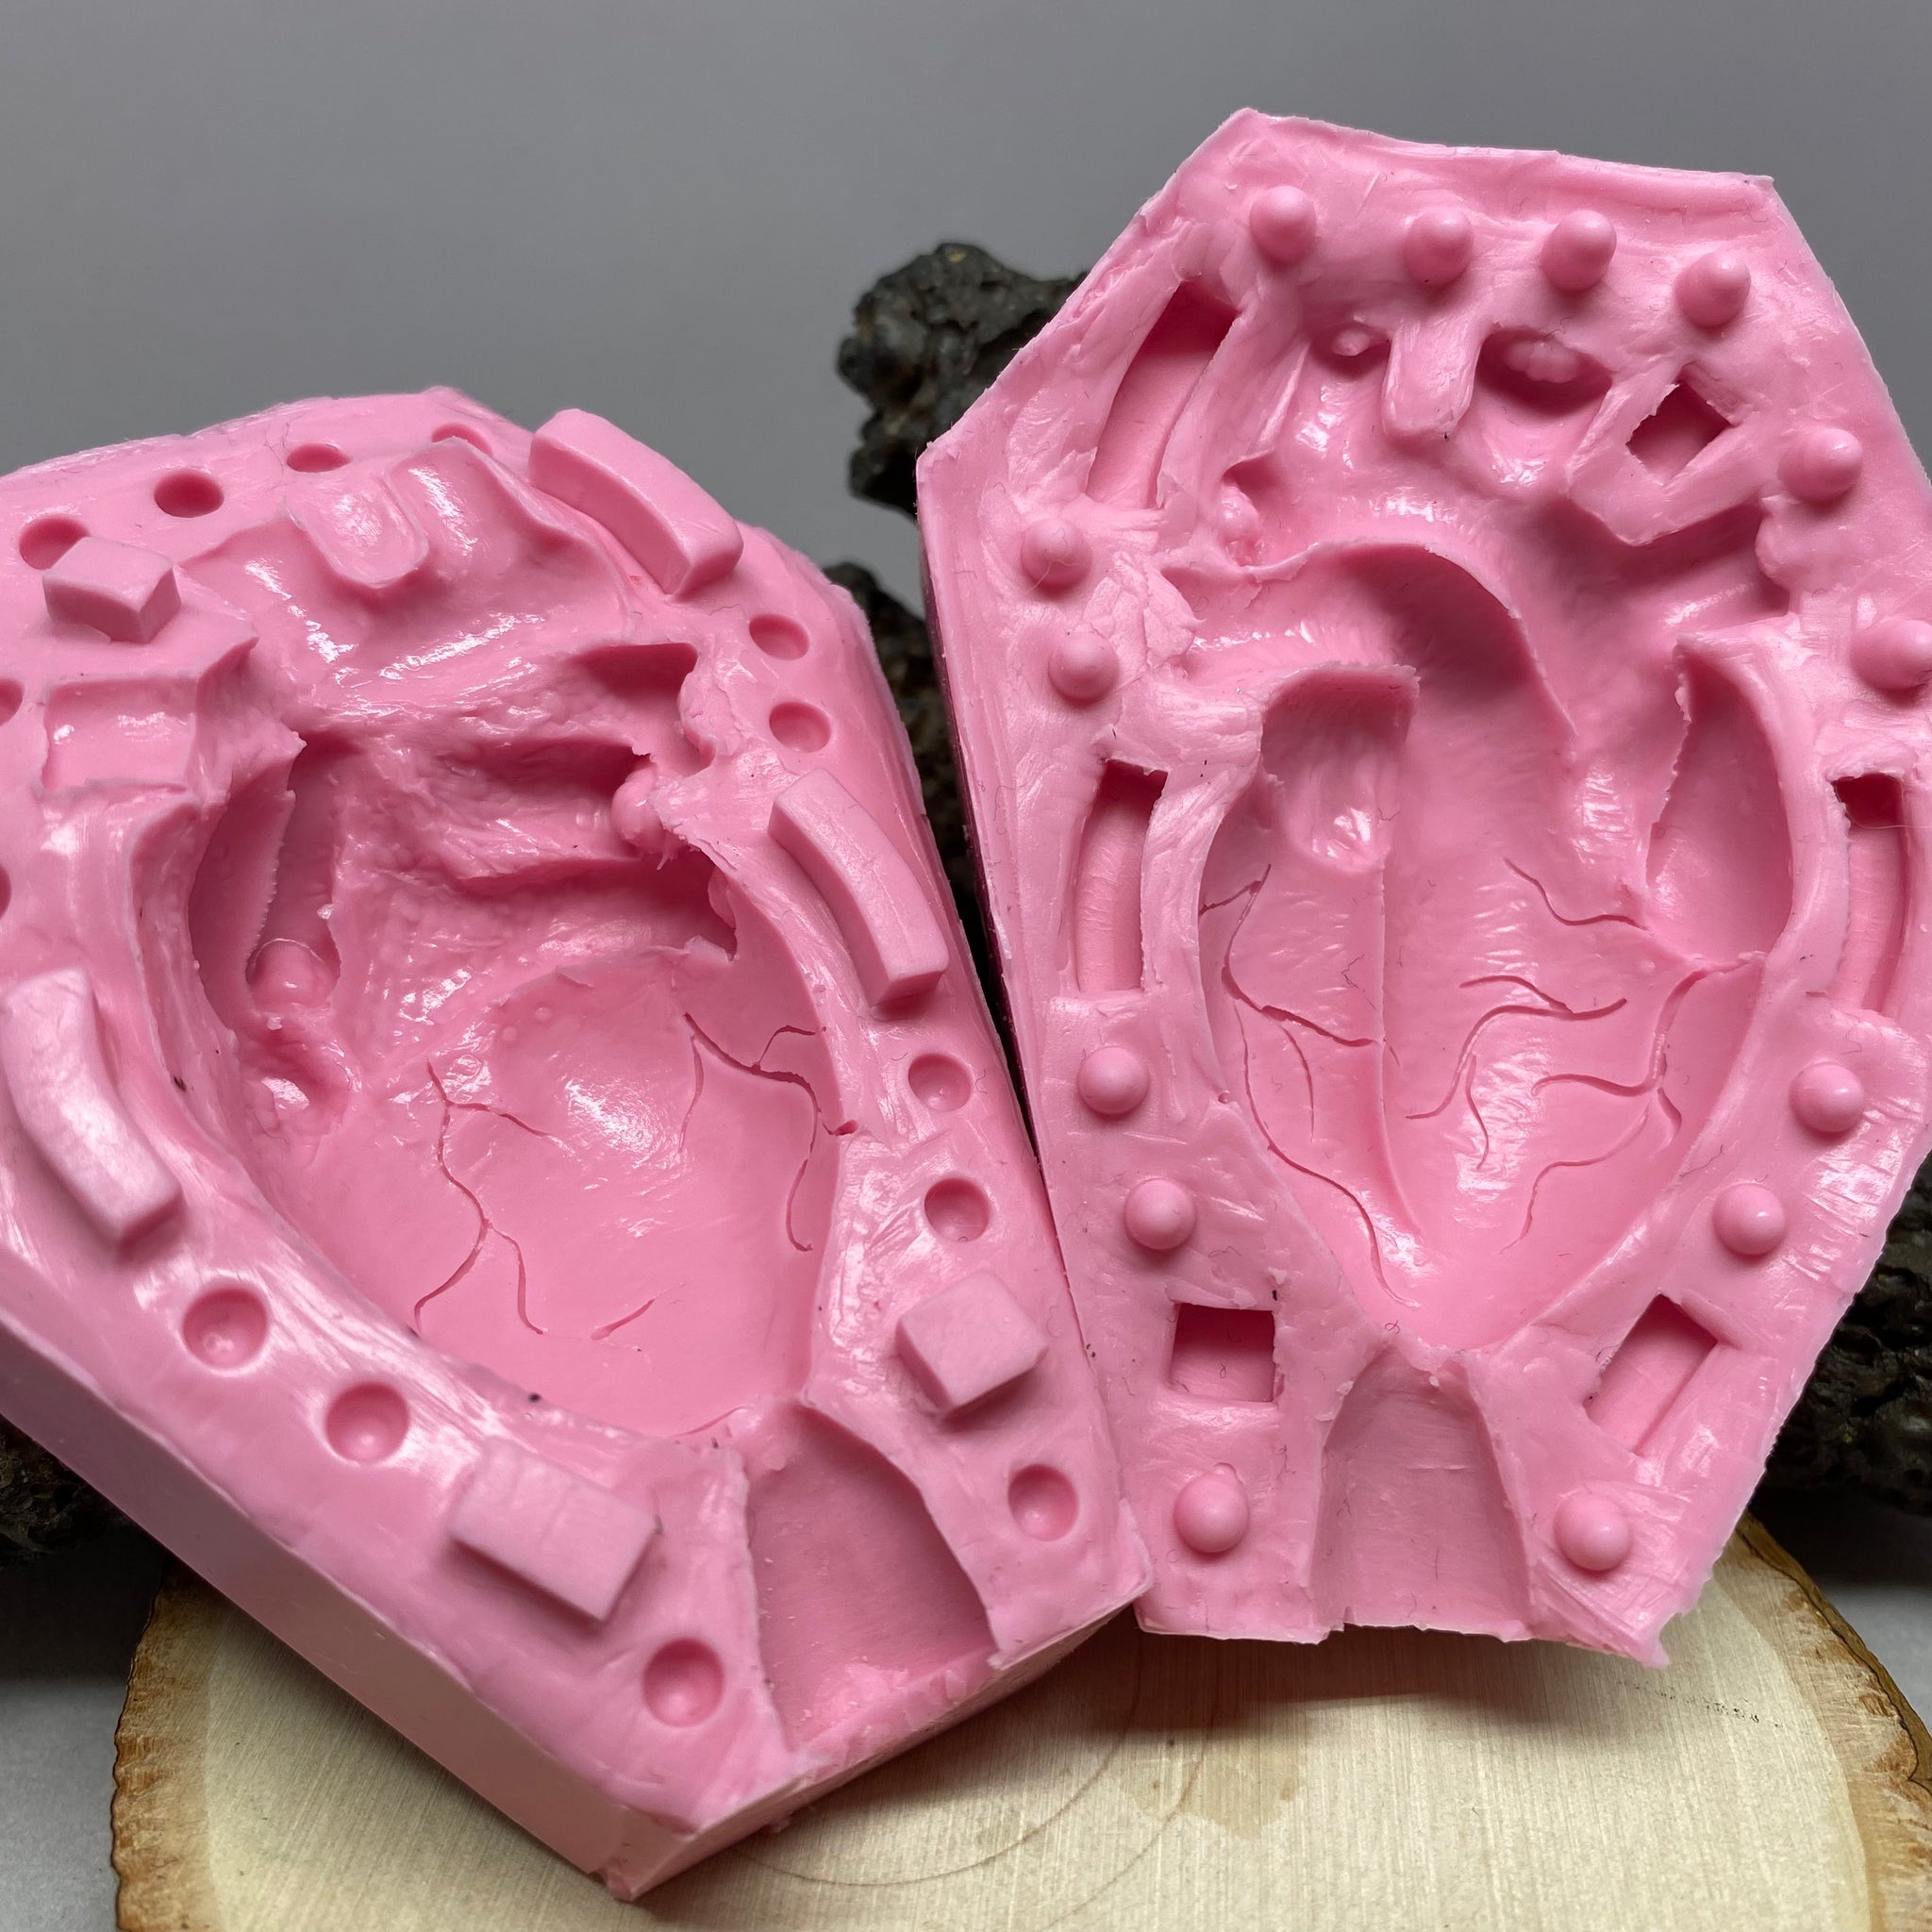 Bite-Size Heart, Cloud & Raindrop Silicone Mold (2 Pack)